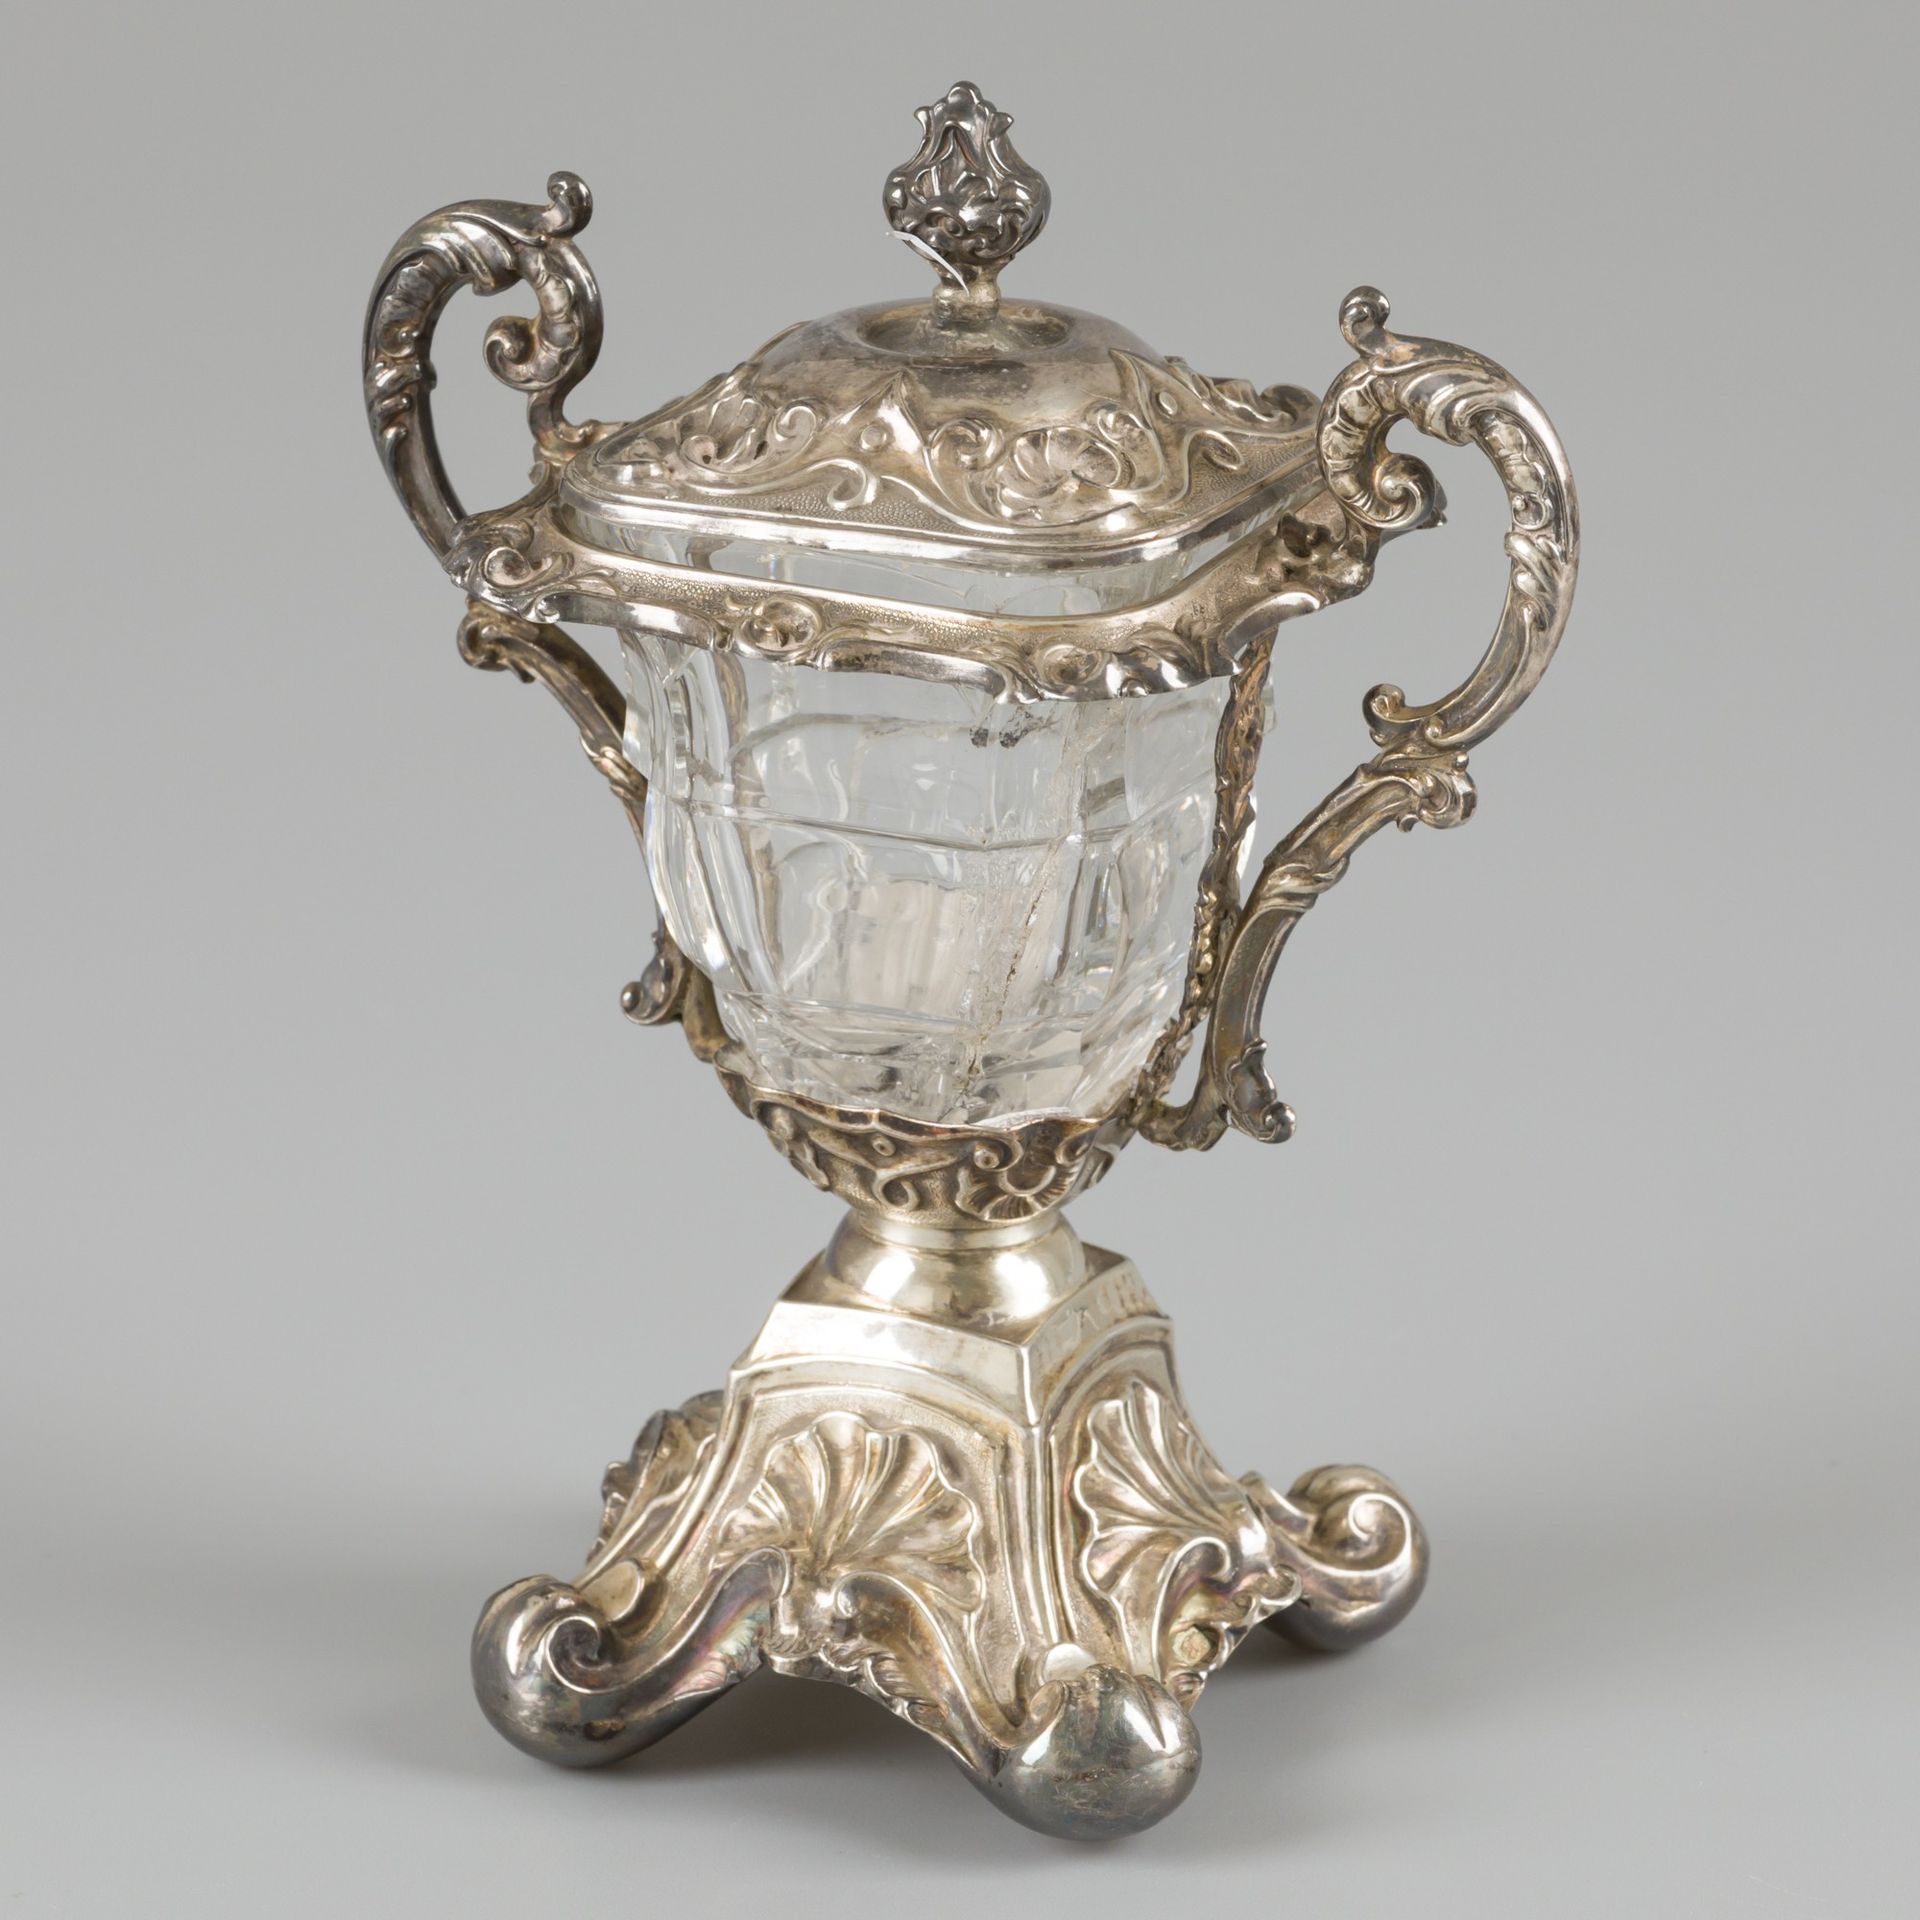 Mustard pot silver. Adorned with embossed decorations and partly filled. Belgium&hellip;